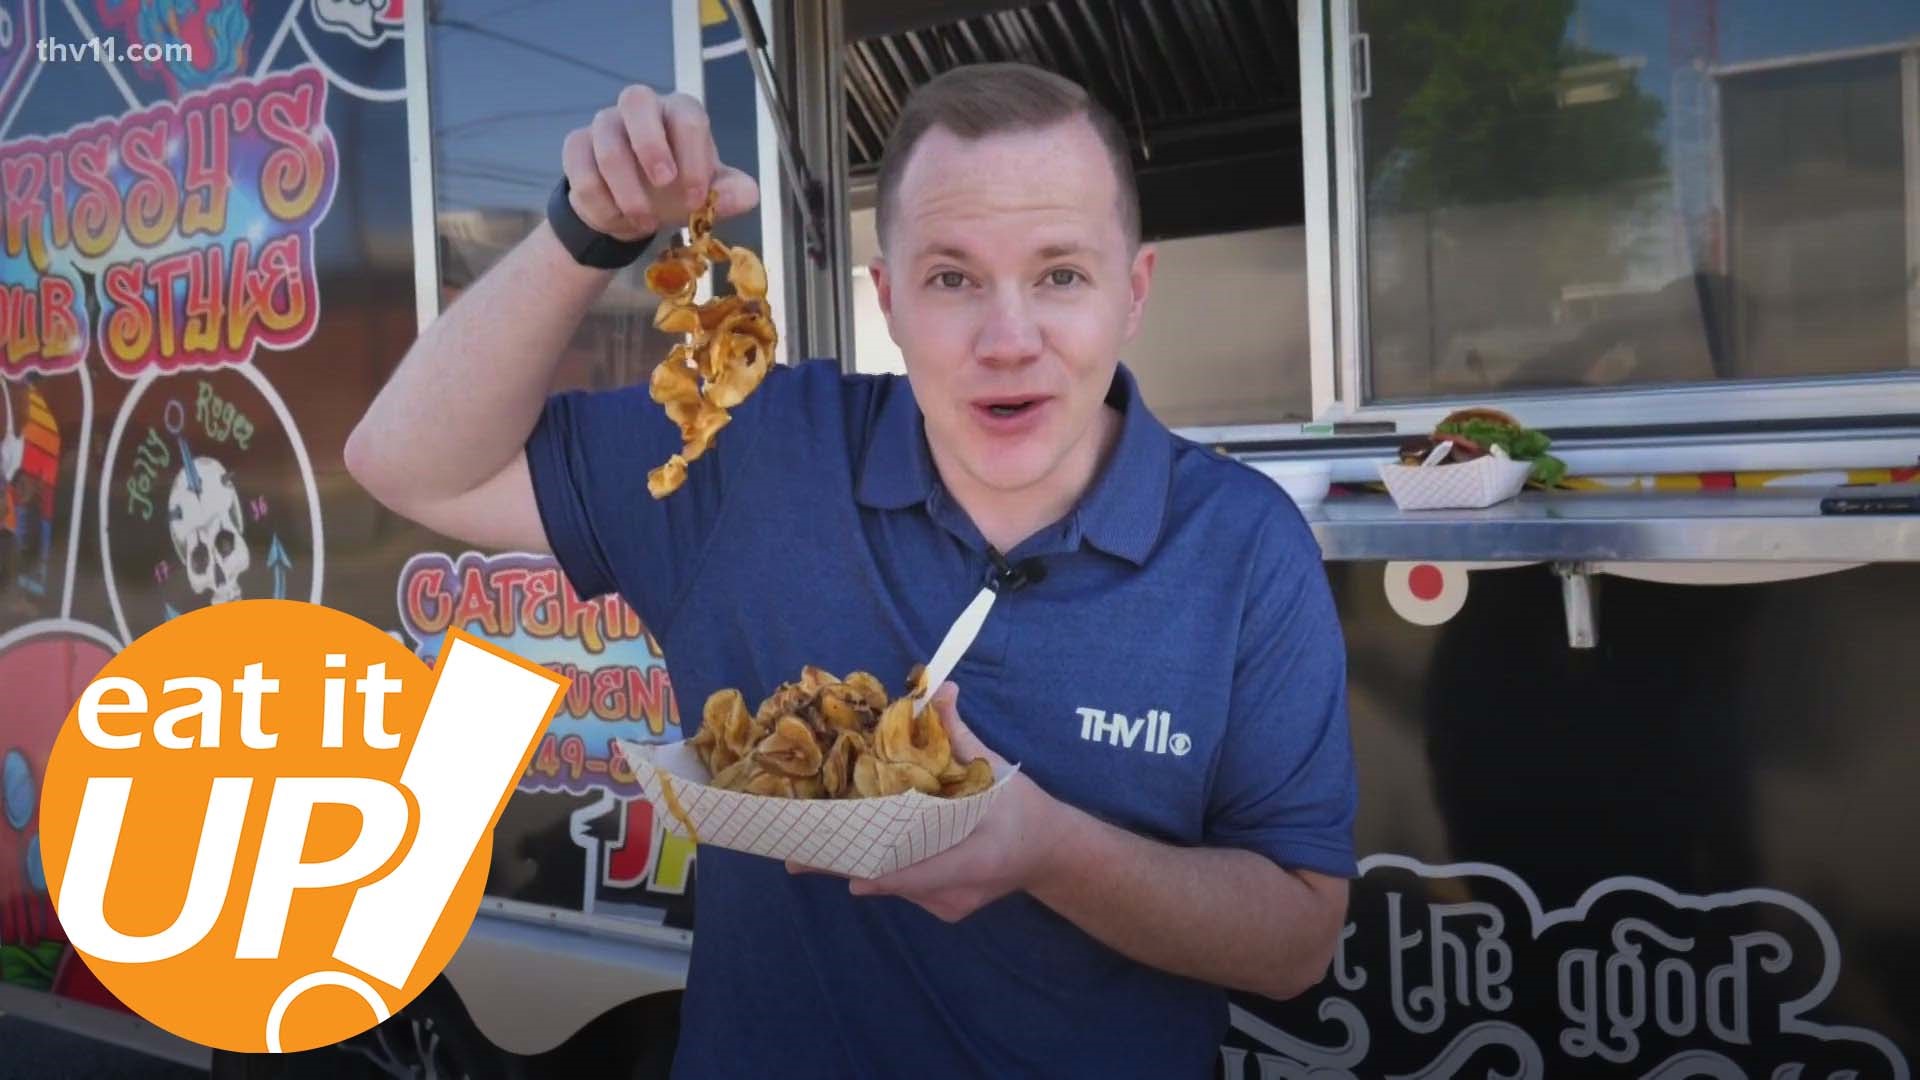 On this week's episode of Eat It Up, Skot Covert visits Crissy's Pub Style, a Central Arkansas food truck serving up colorful pub-style favorites.